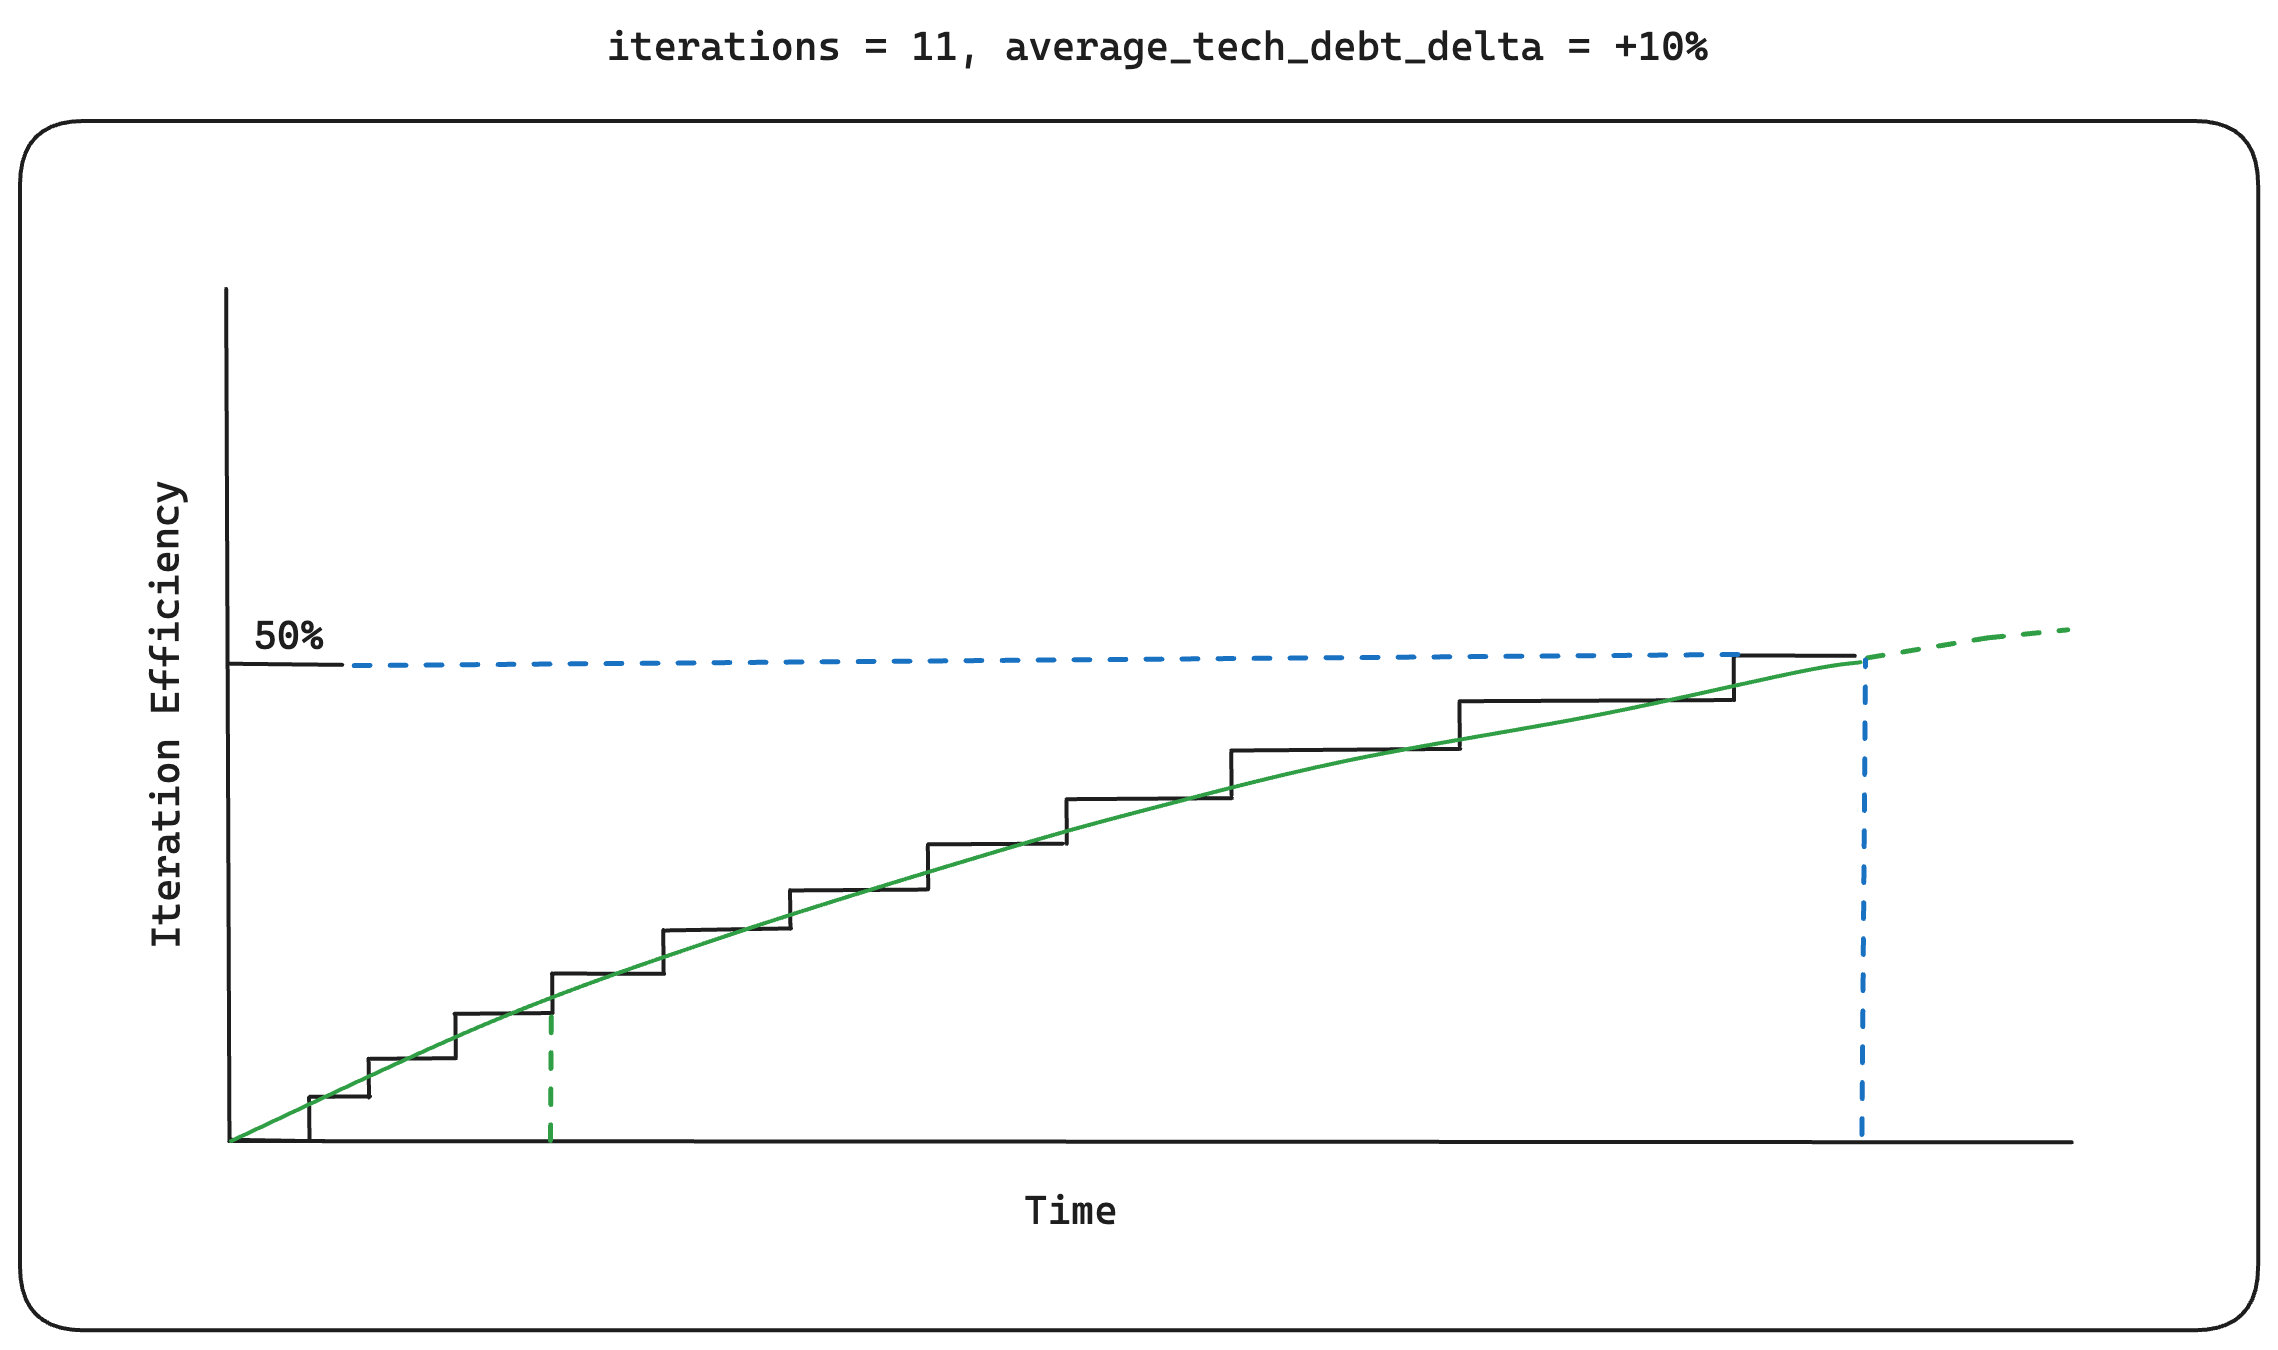 A chart showing iteration efficiency over 11 iterations with an average technical debt delta of +10%